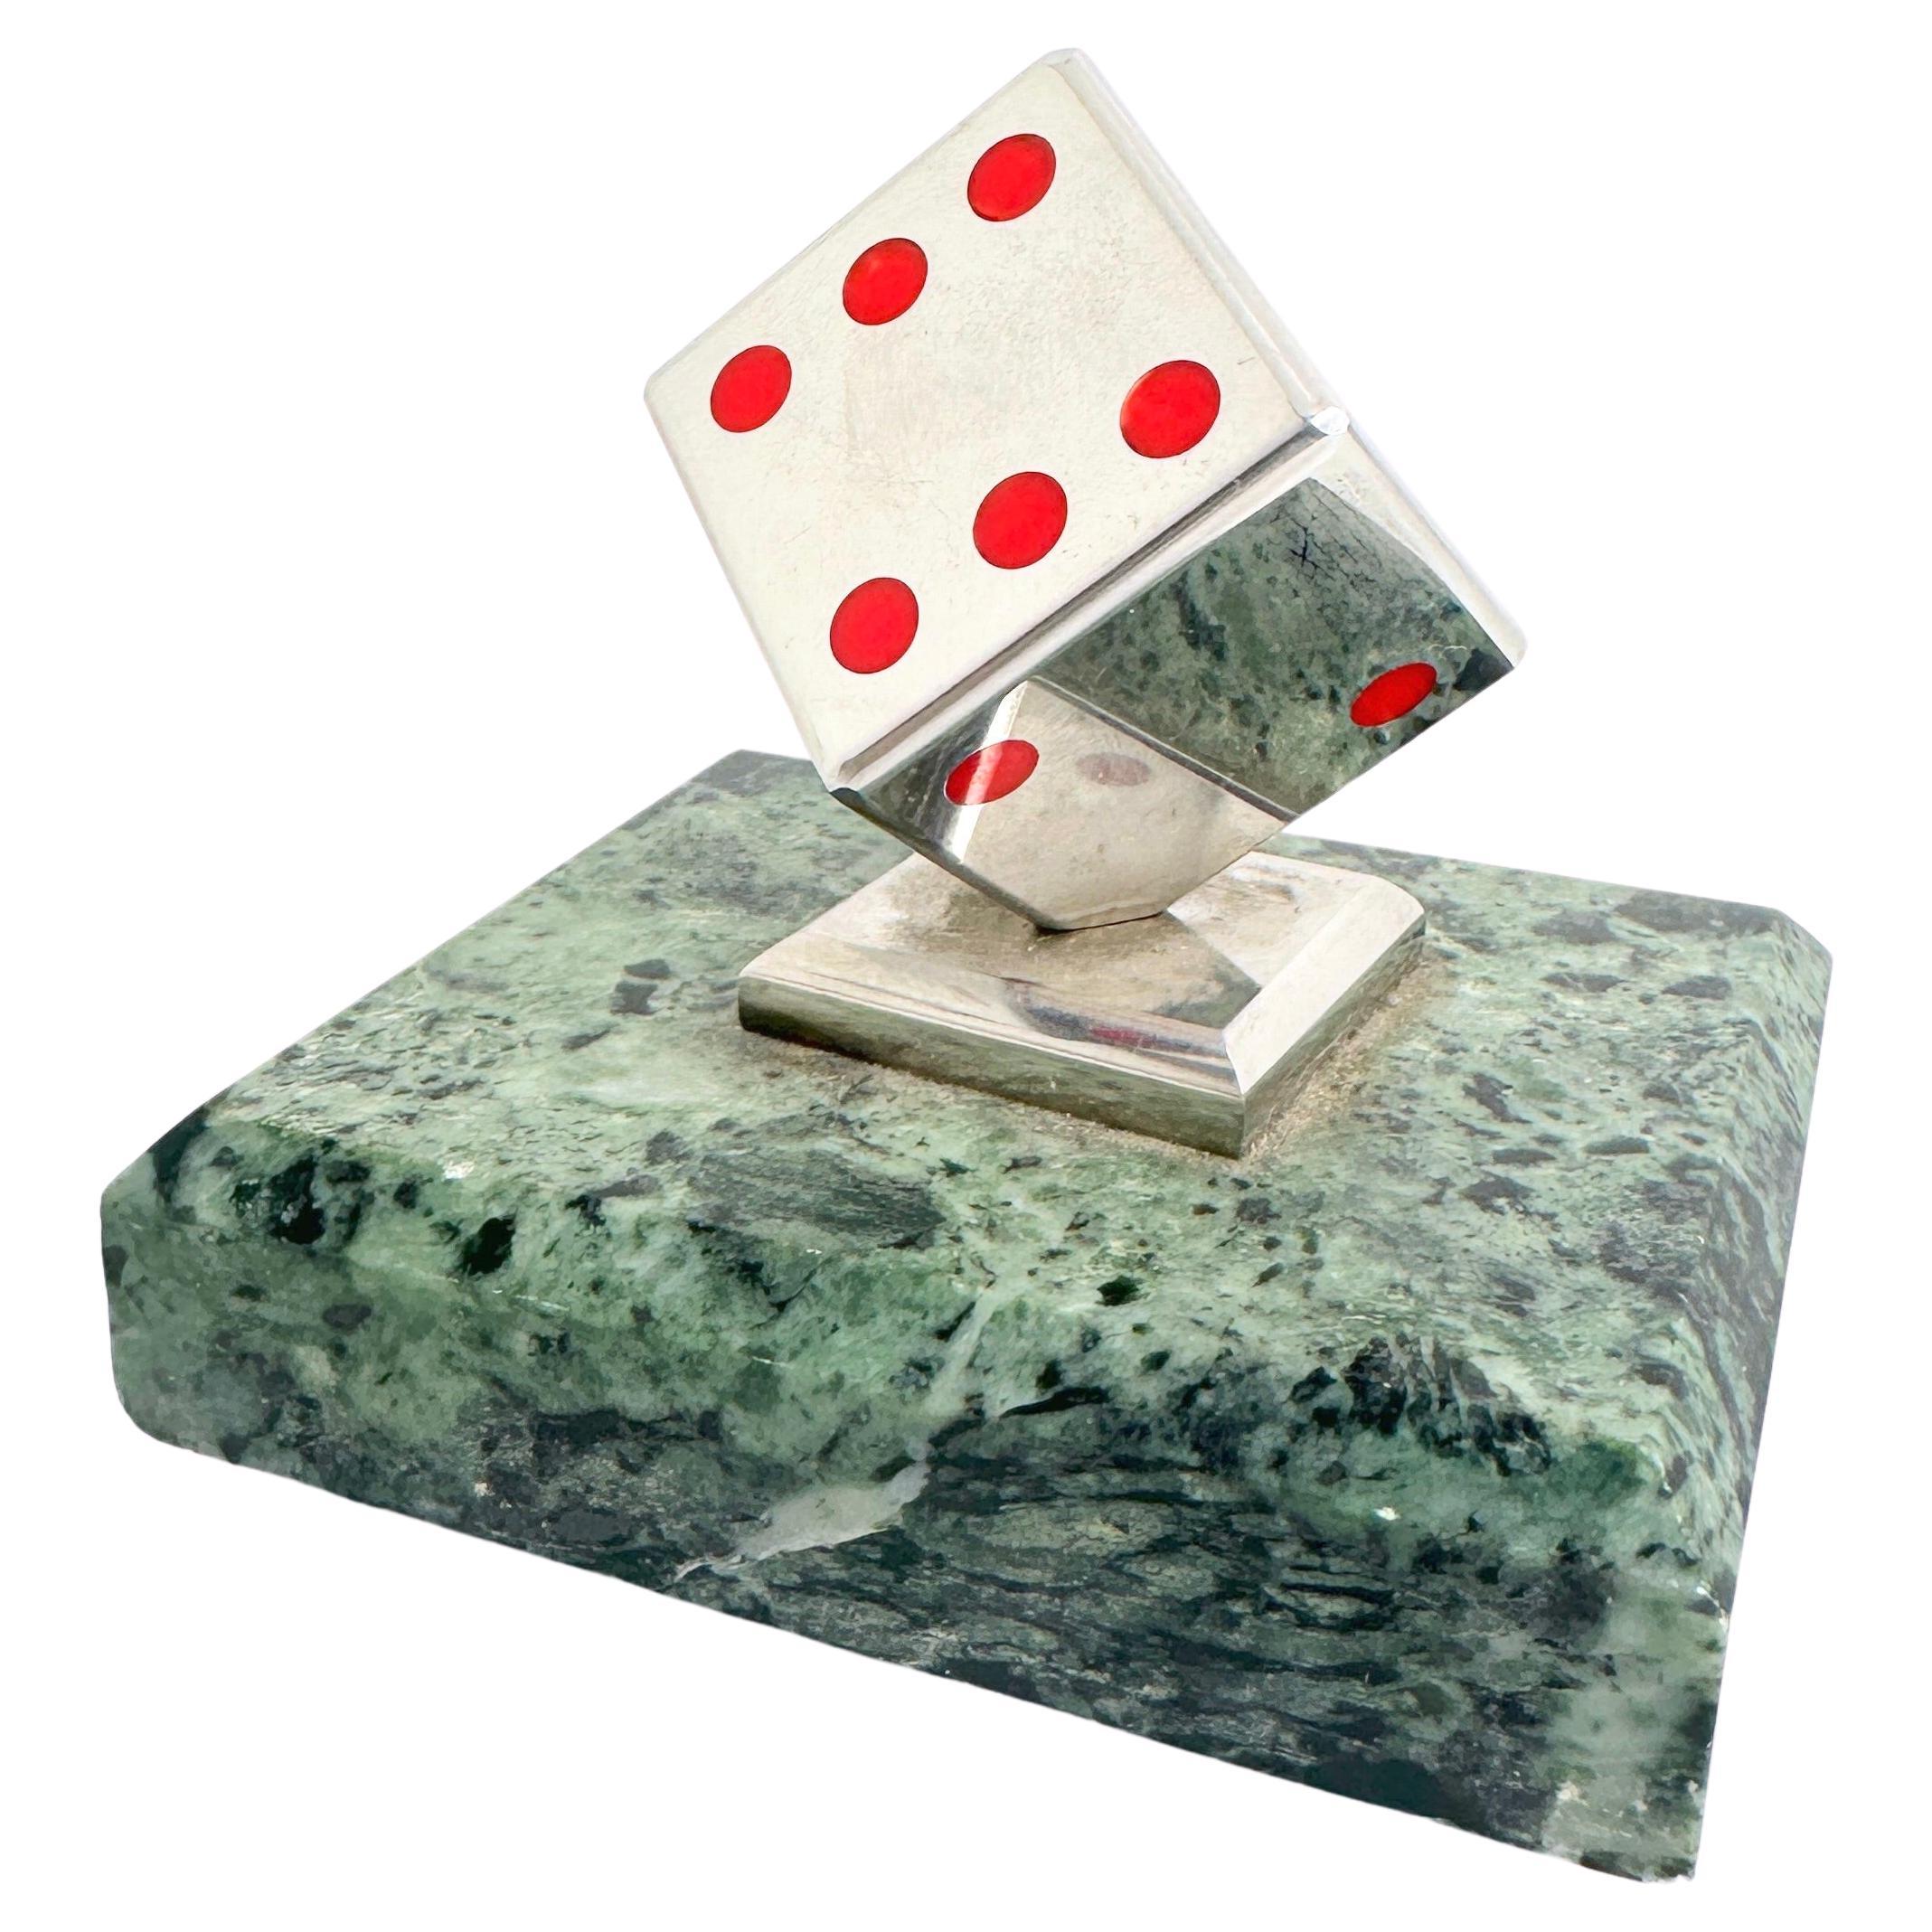 Dice Metal Statue on Marble Base Paper Weight Mid-Century Modern, German, 1970s